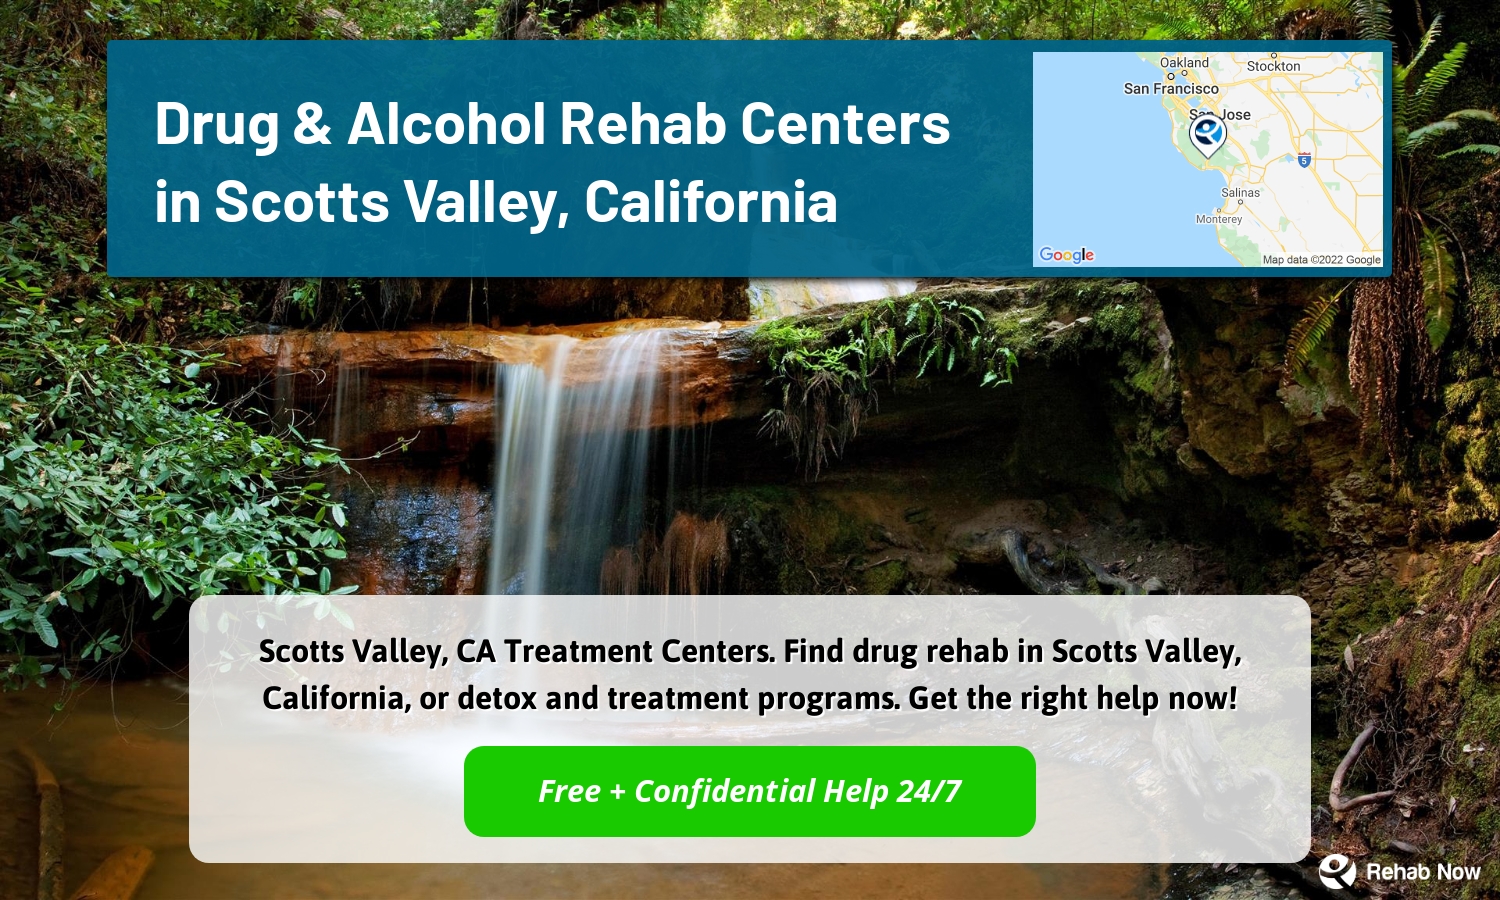 Scotts Valley, CA Treatment Centers. Find drug rehab in Scotts Valley, California, or detox and treatment programs. Get the right help now!